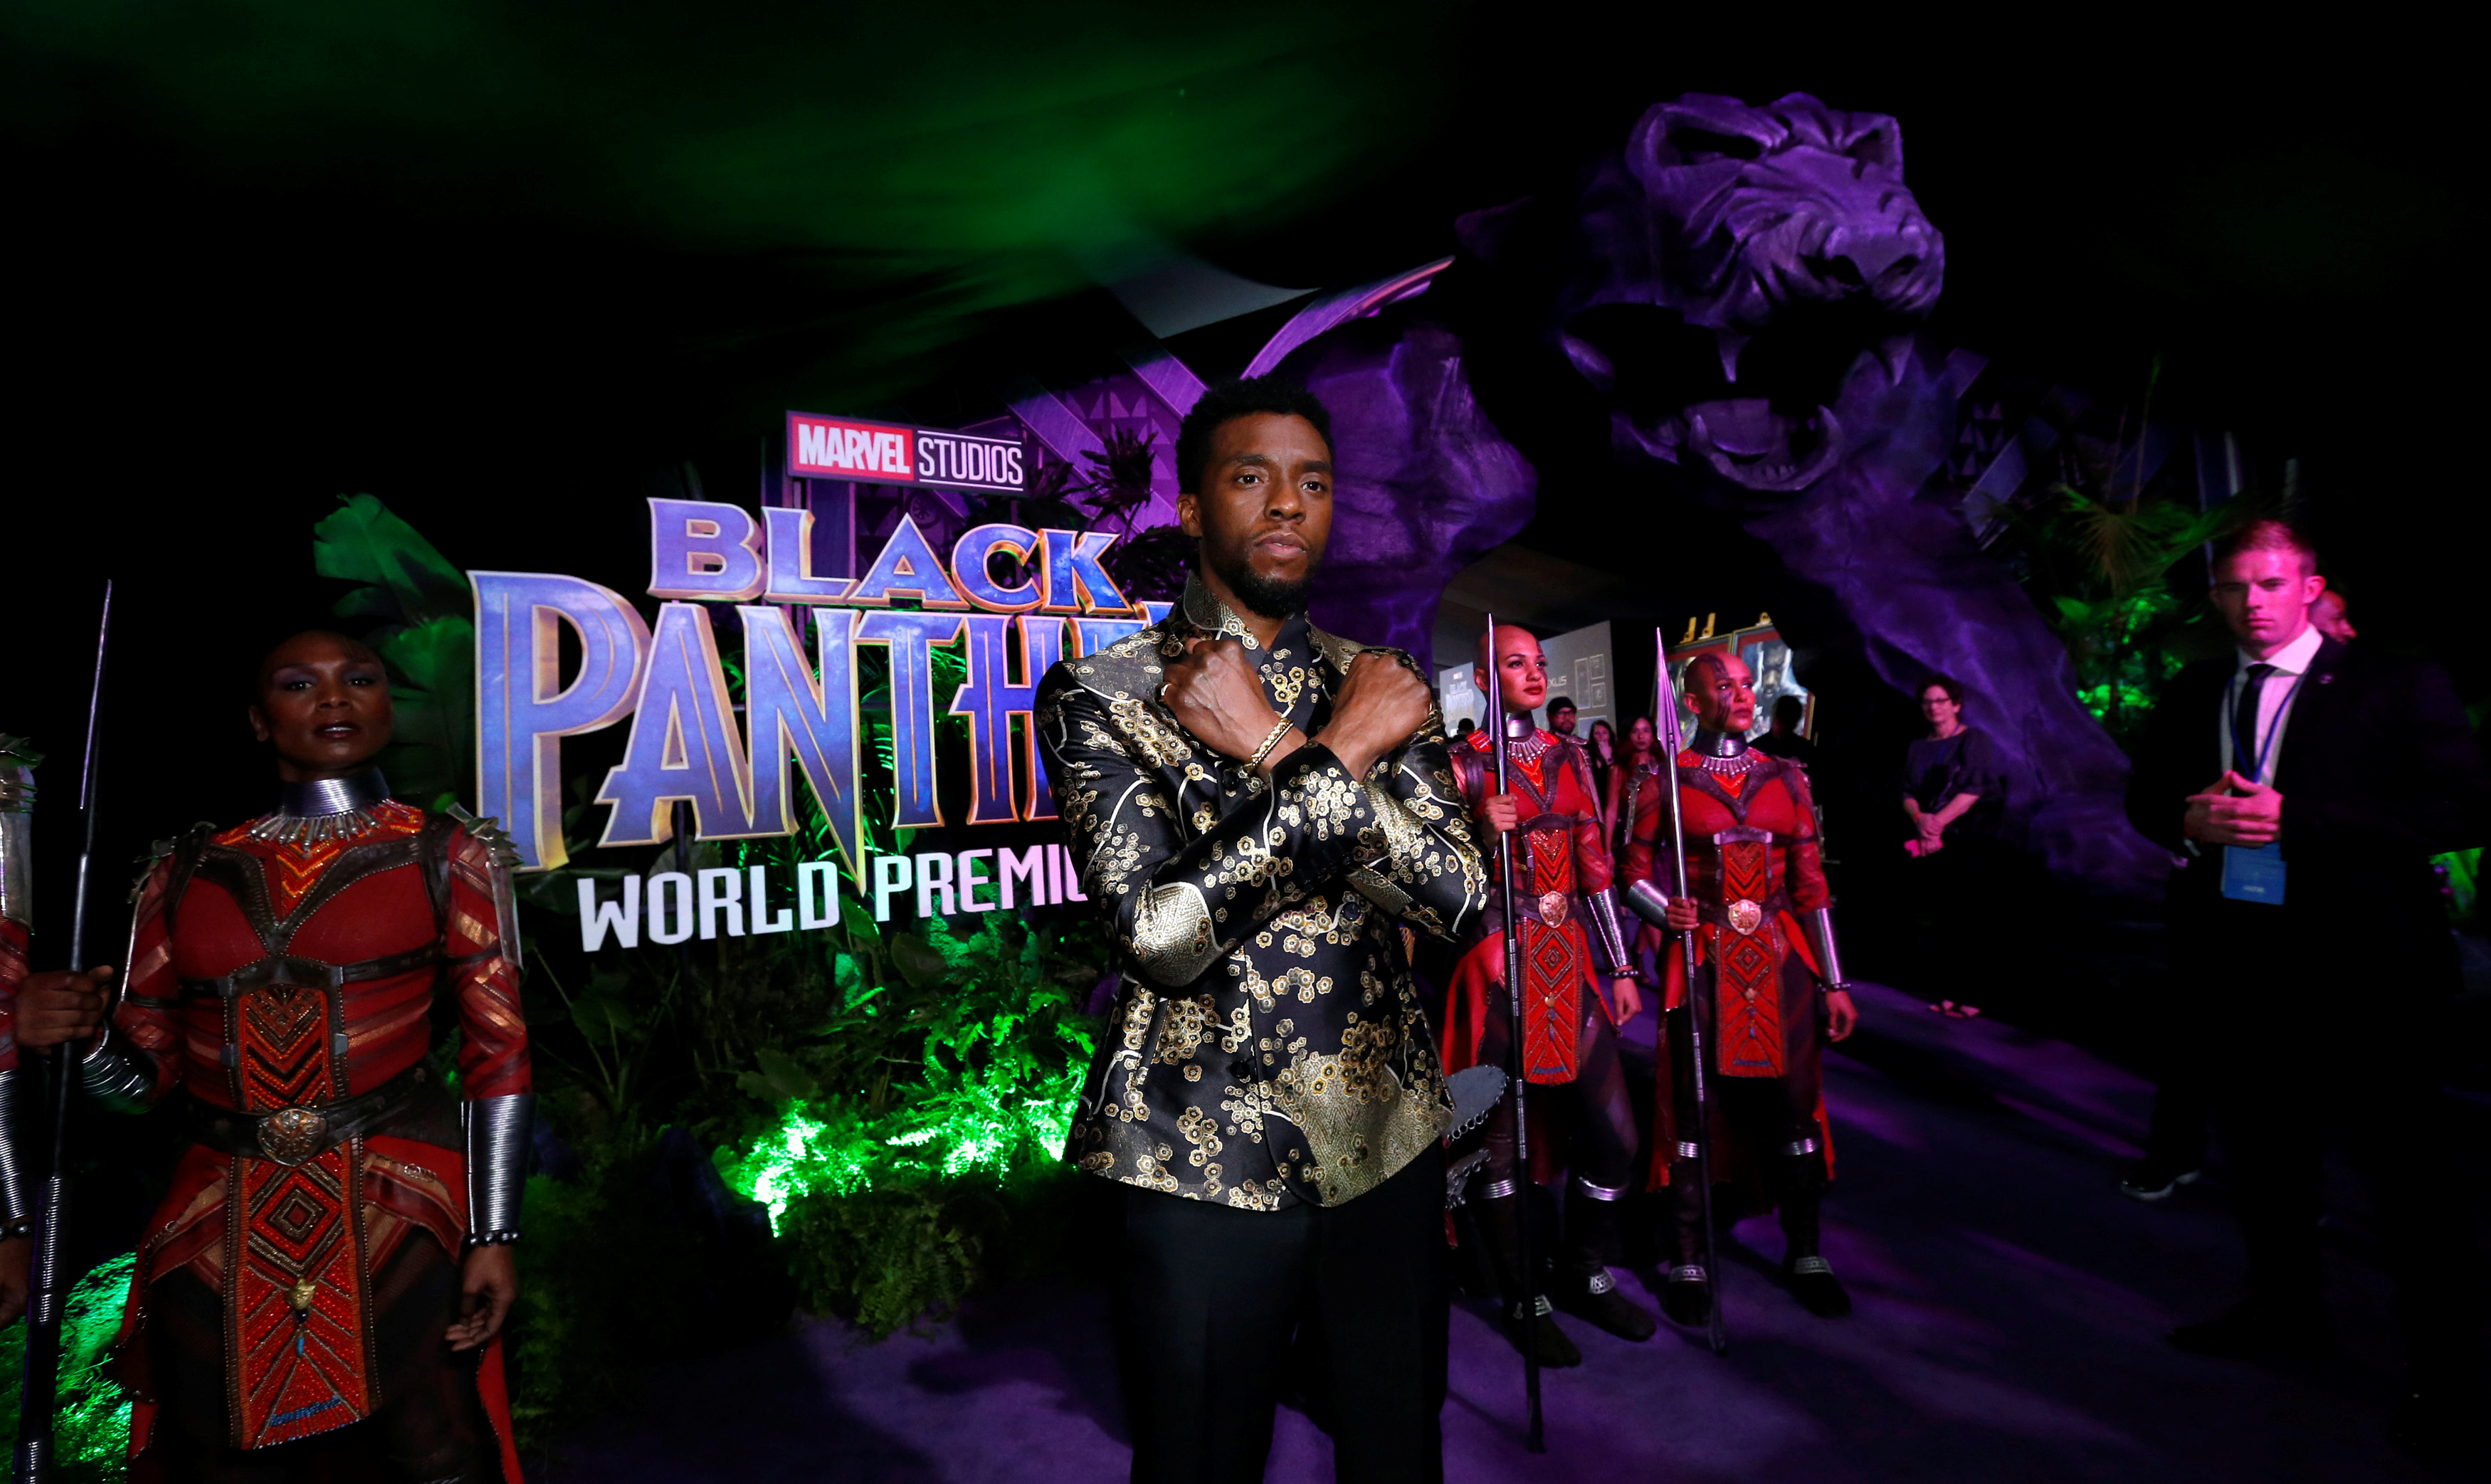 Cast member Chadwick Boseman poses at the premiere of "Black Panther" in Los Angeles